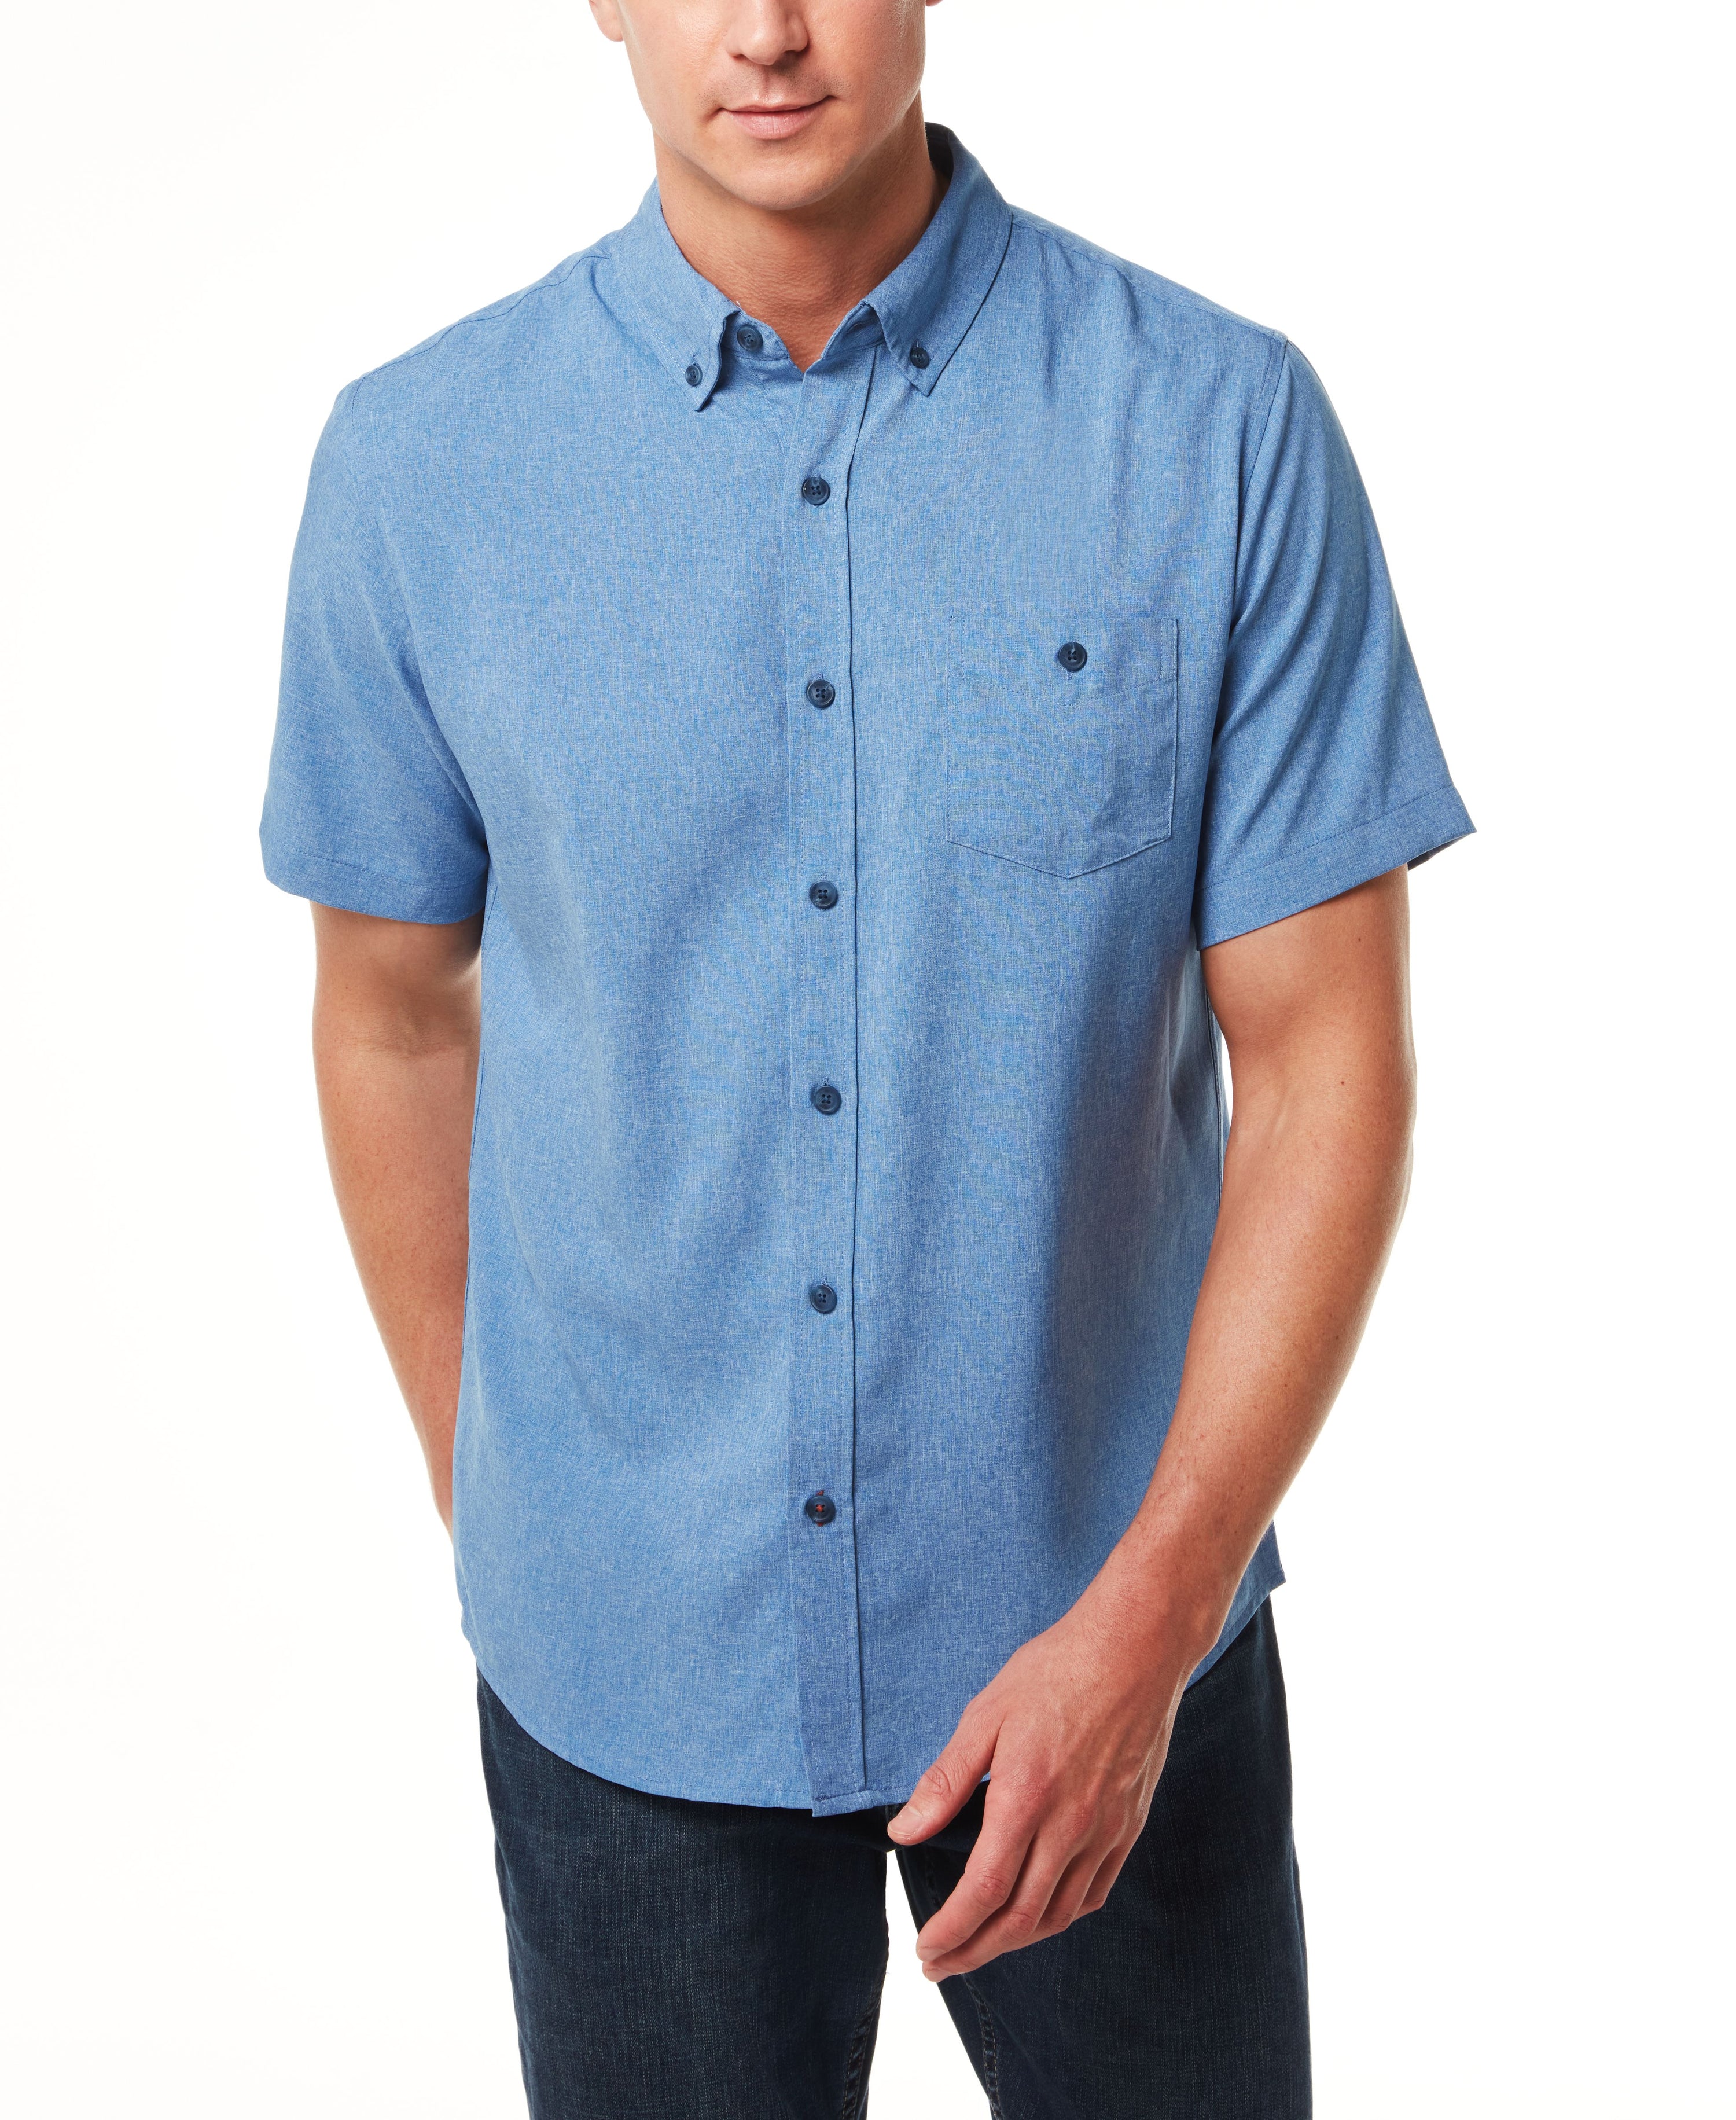 Performance Shirt in Federal Blue